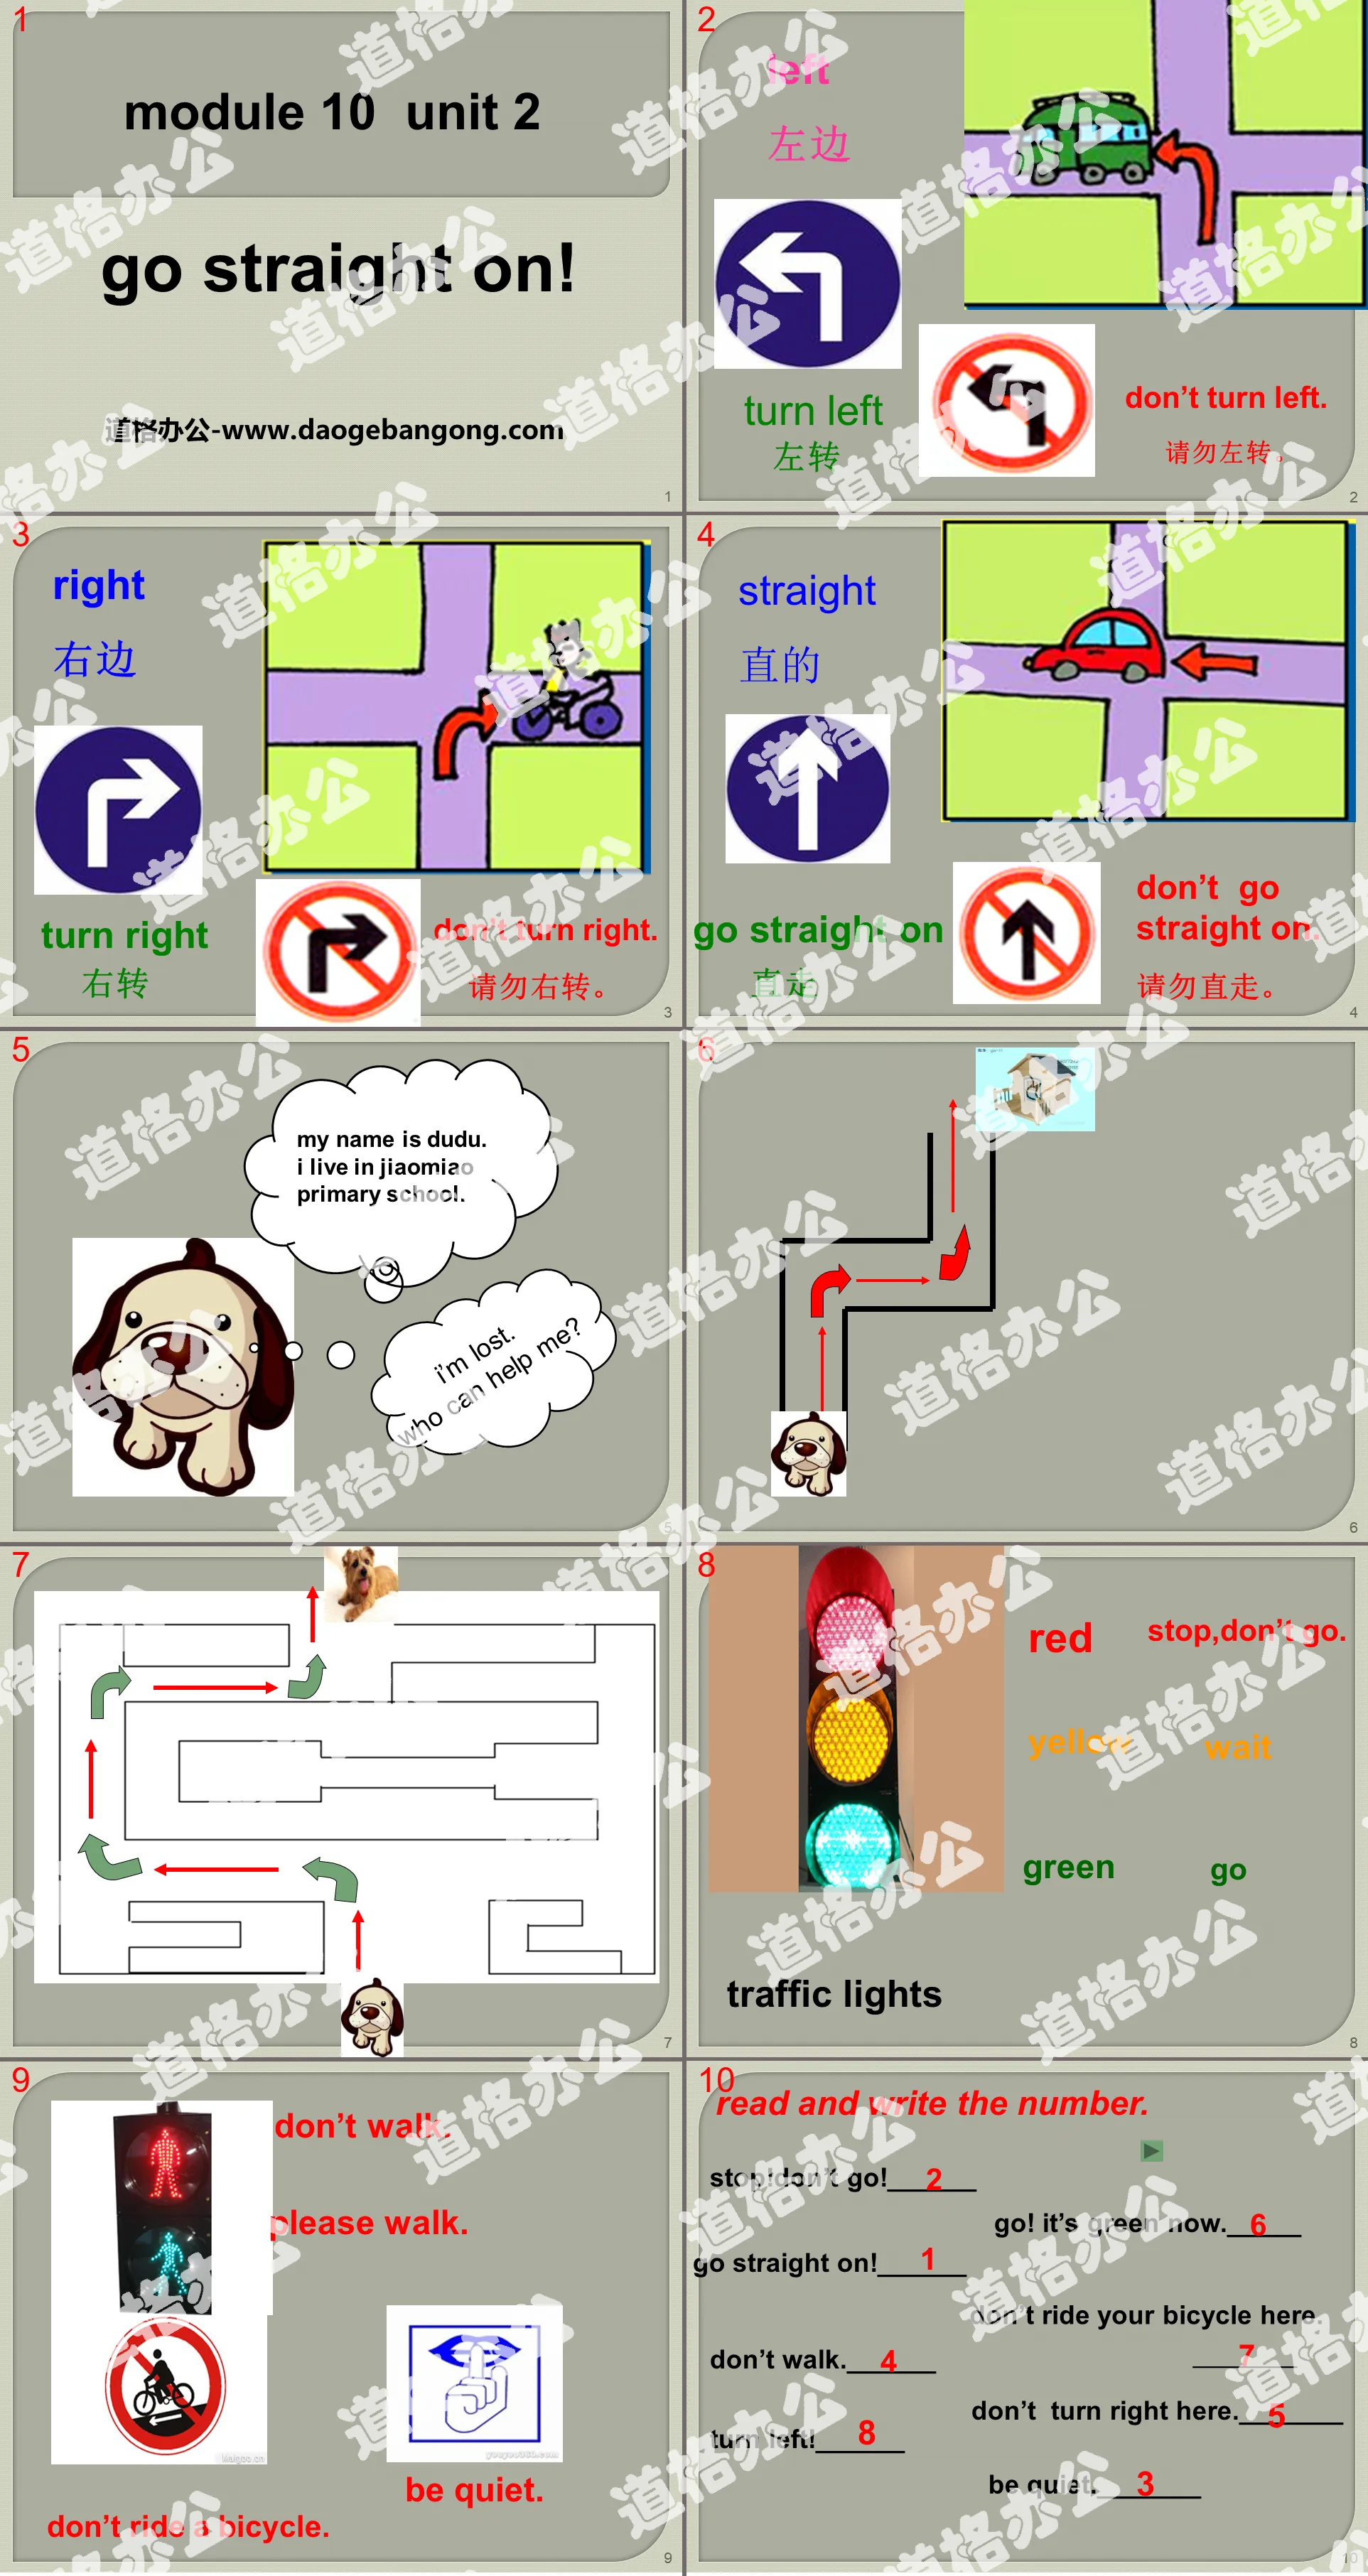 "Go straight on" PPT courseware 7